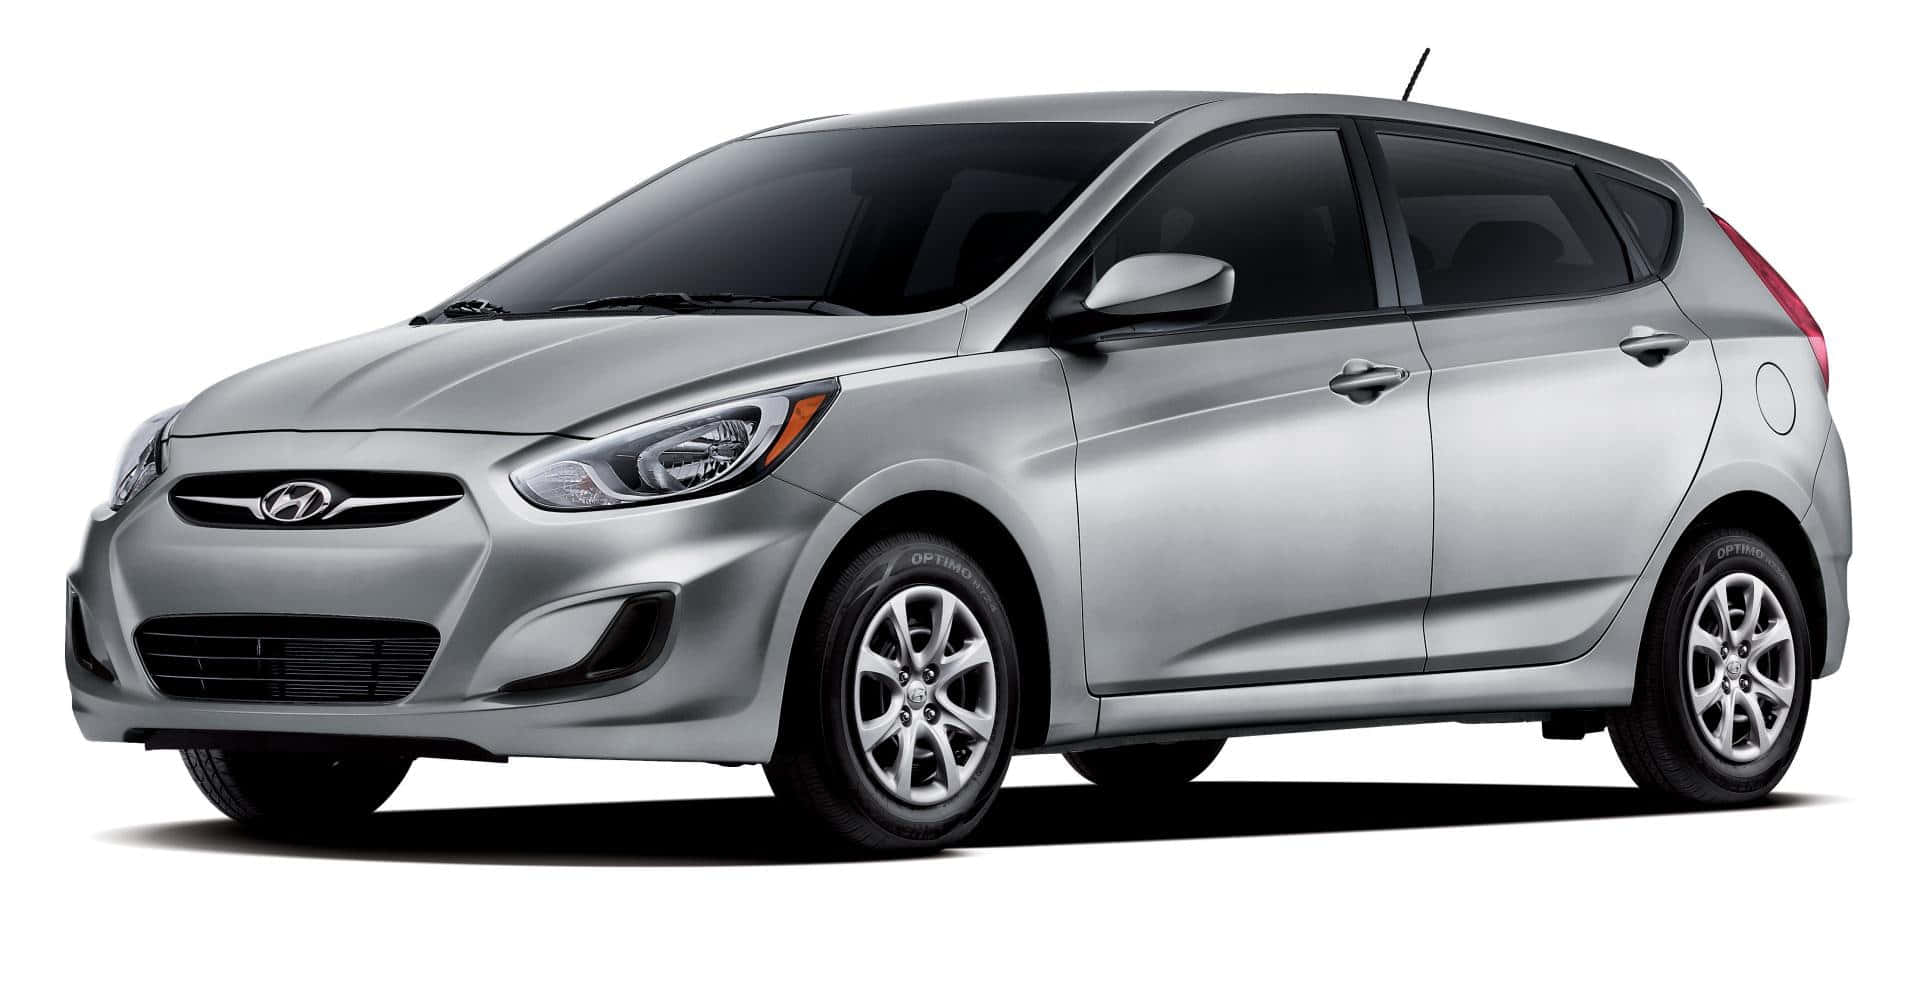 Captivating Hyundai Accent on the Road Wallpaper